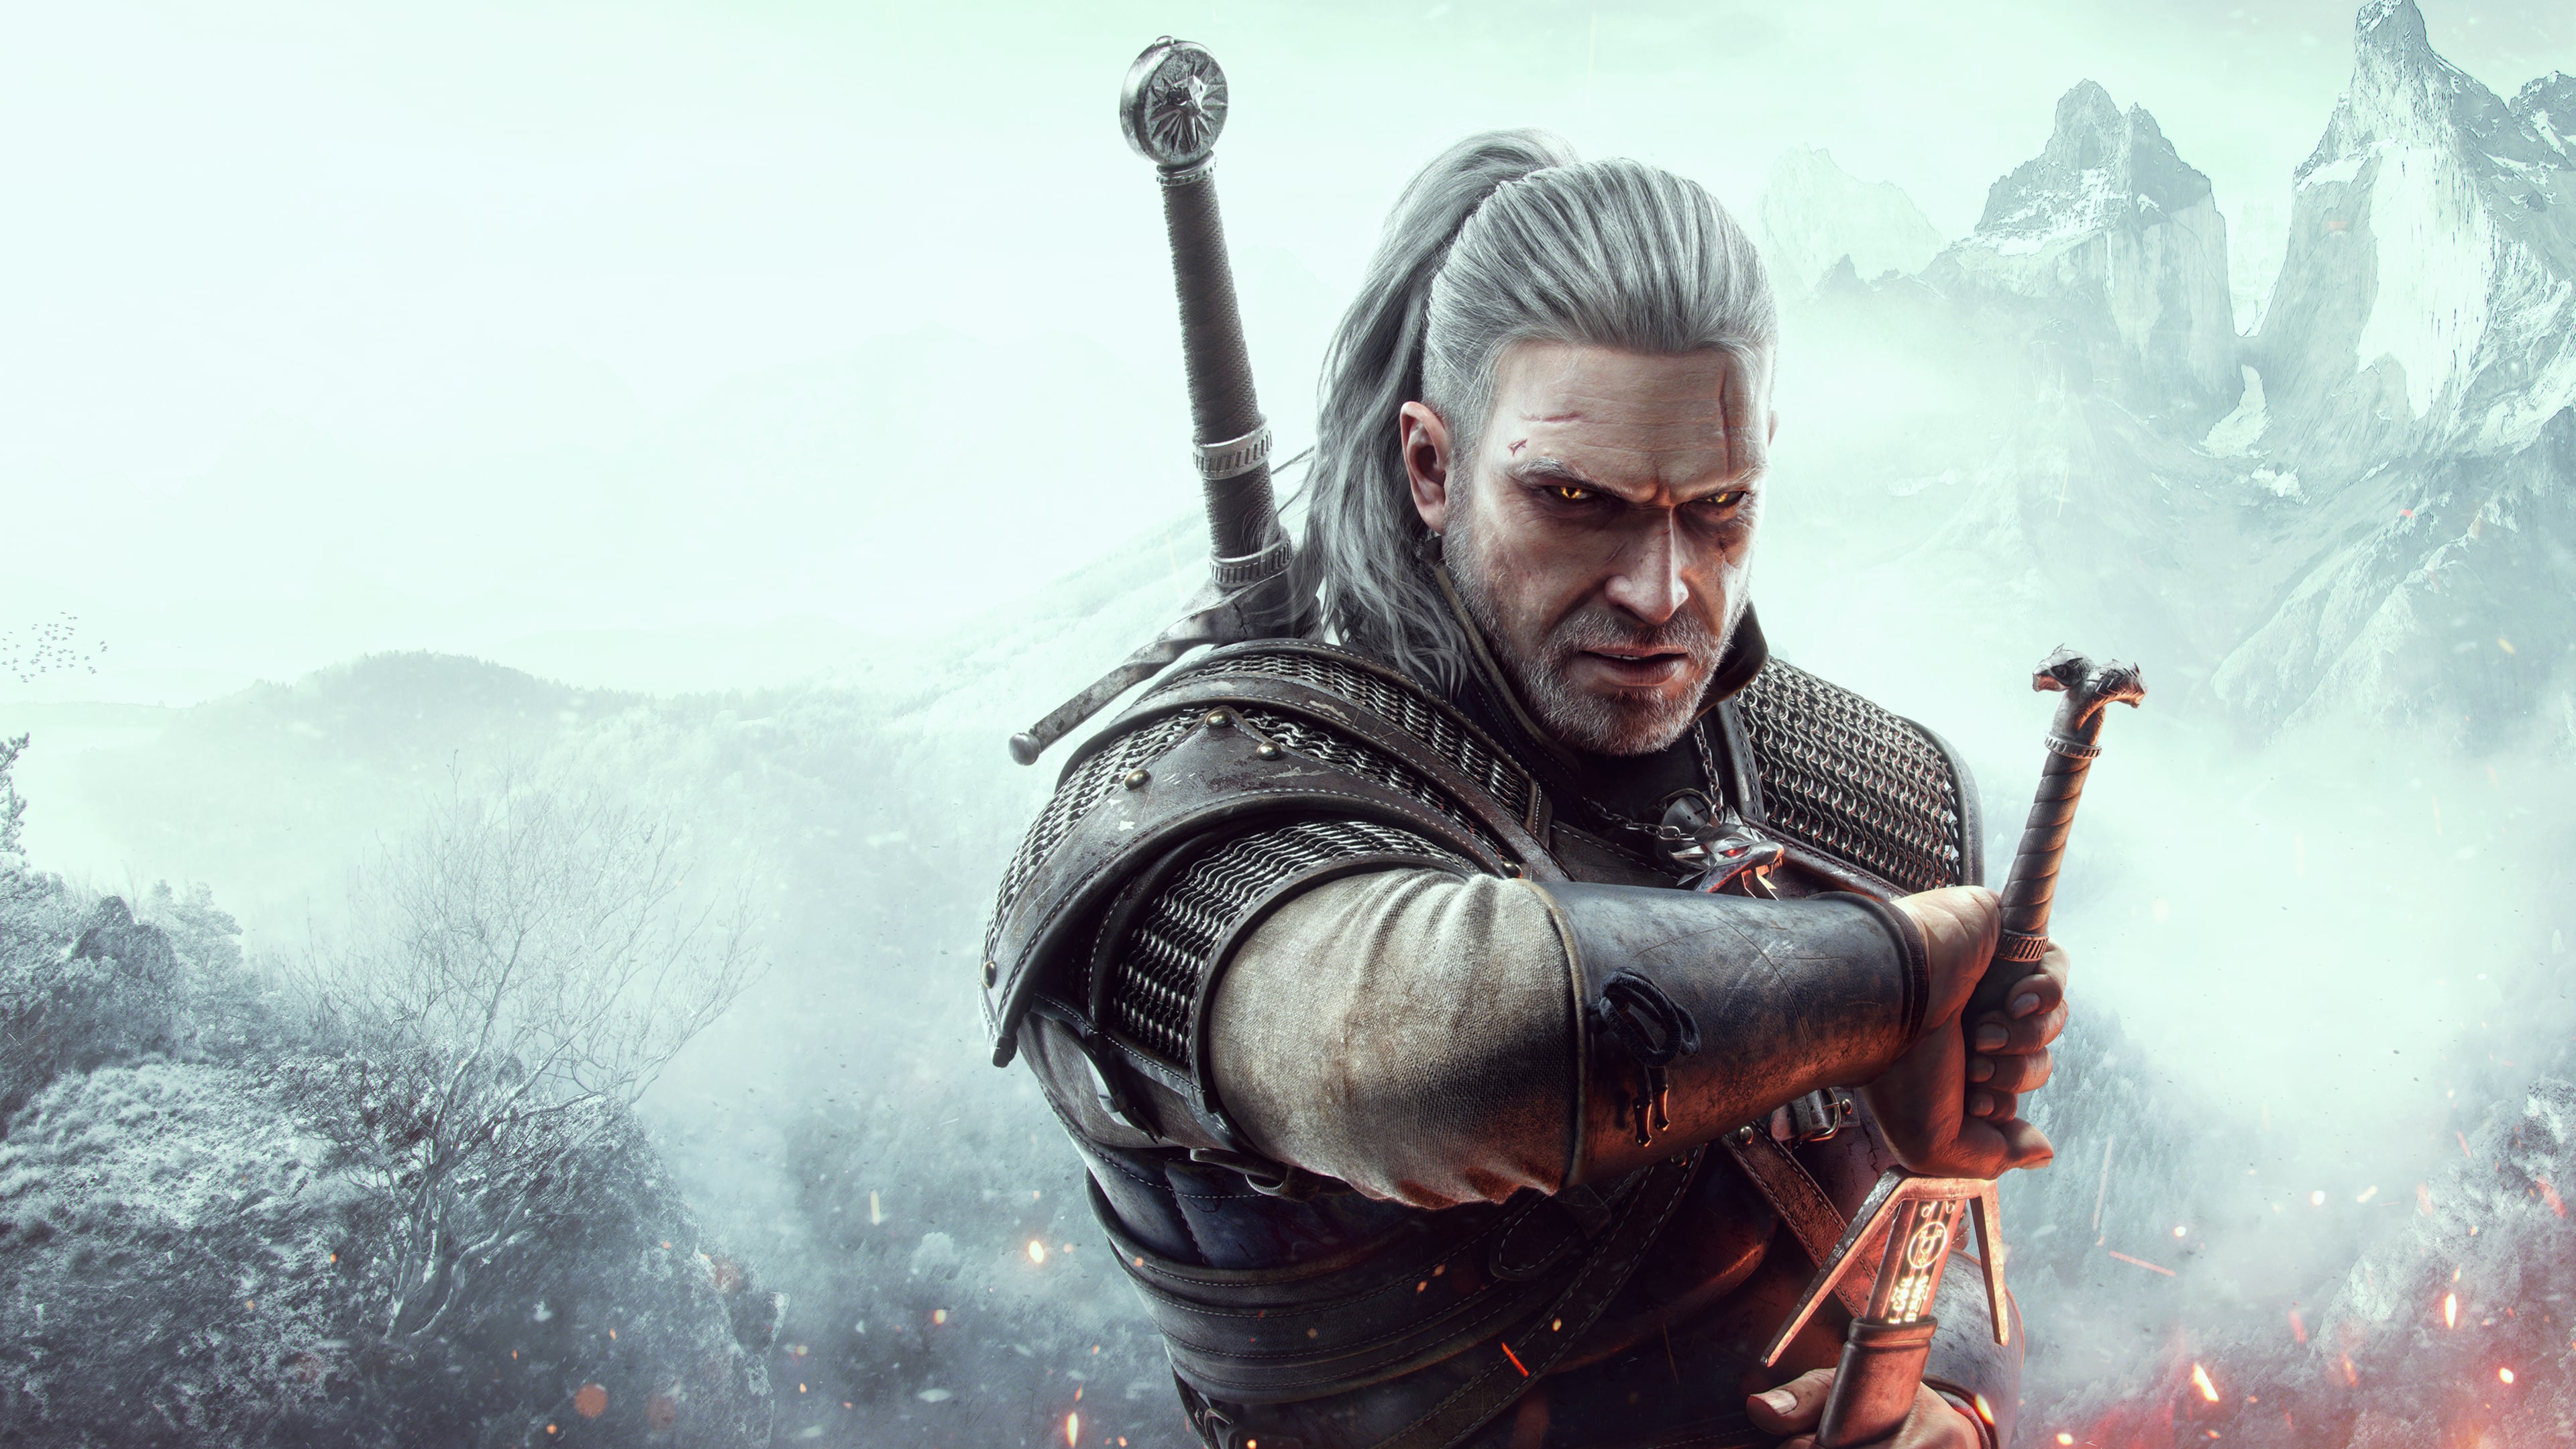 The Witcher 3: Wild Hunt – Game of the Year Edition (English, Korean, Traditional Chinese)